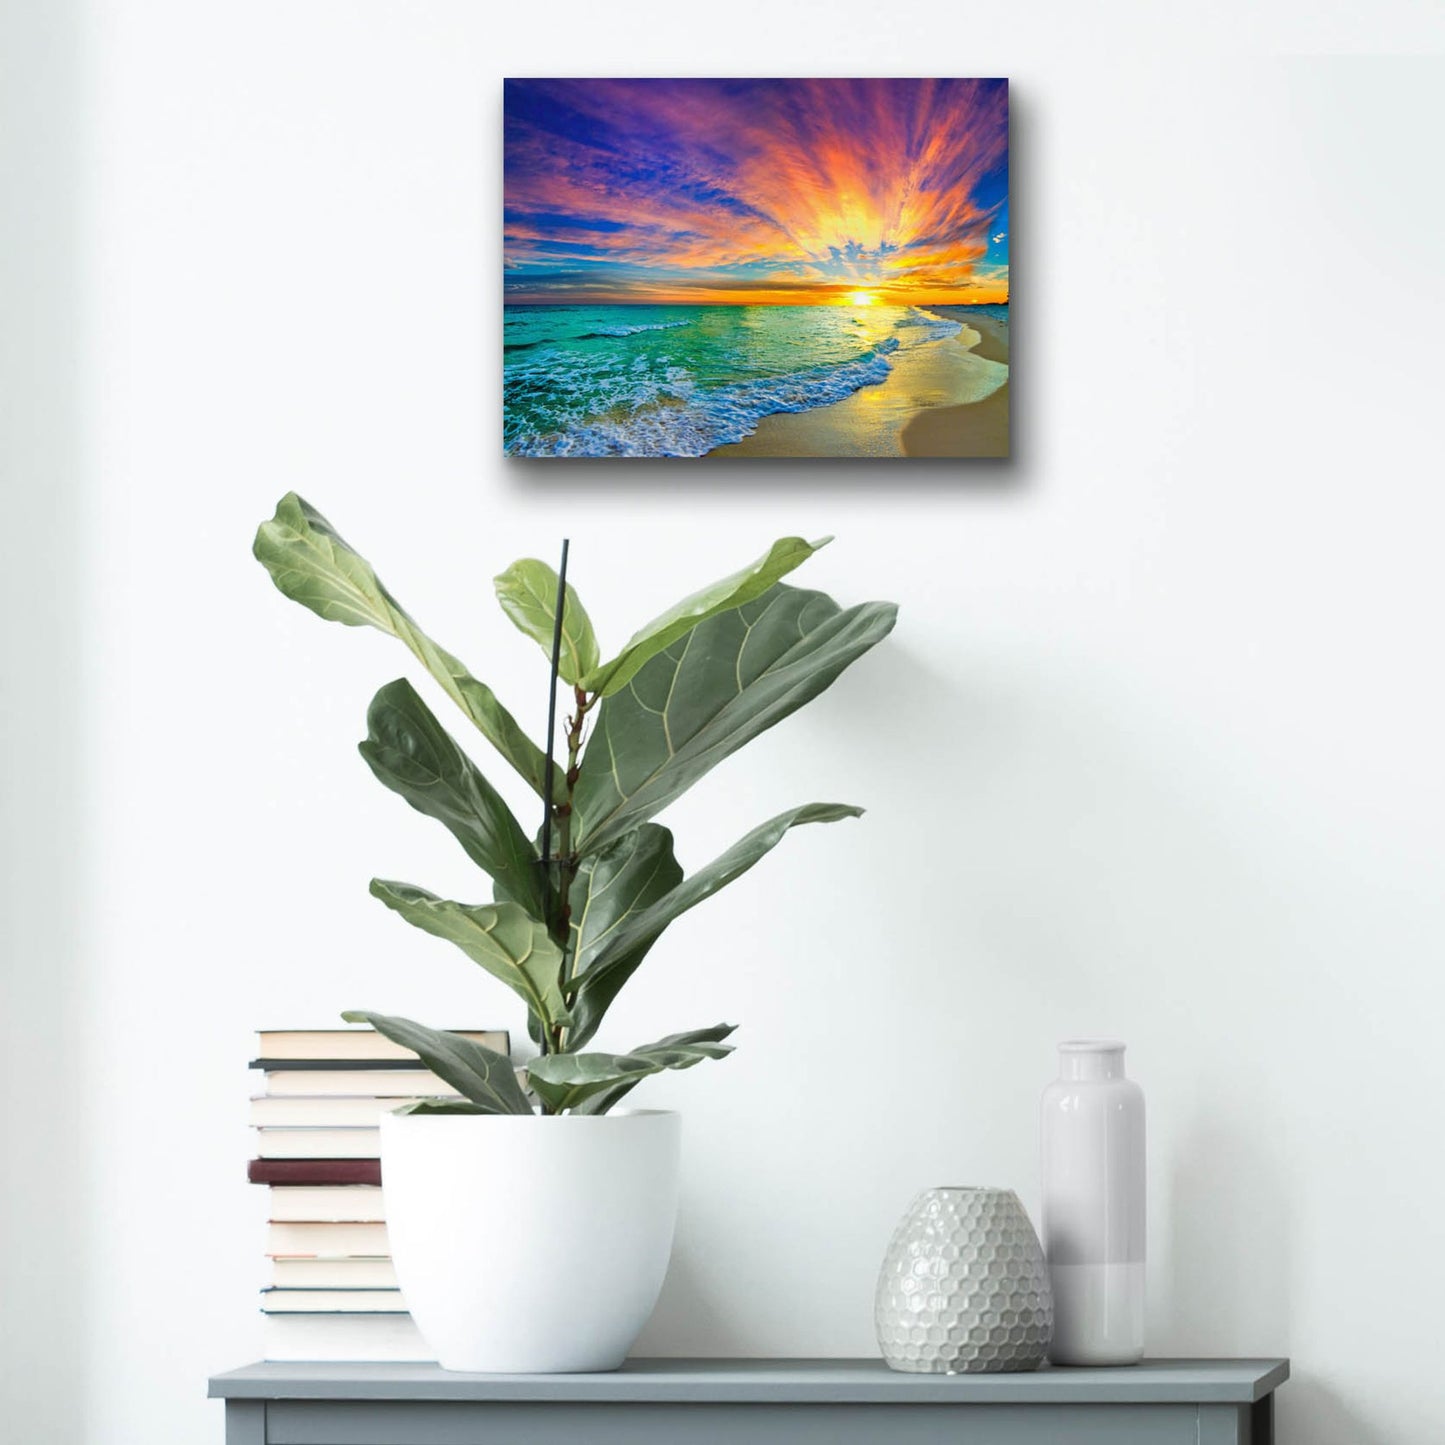 Epic Art 'Colorful Ocean Sunset Orange And Red Beach Sunset' by Ezra Tanner, Acrylic Glass Wall Art,16x12